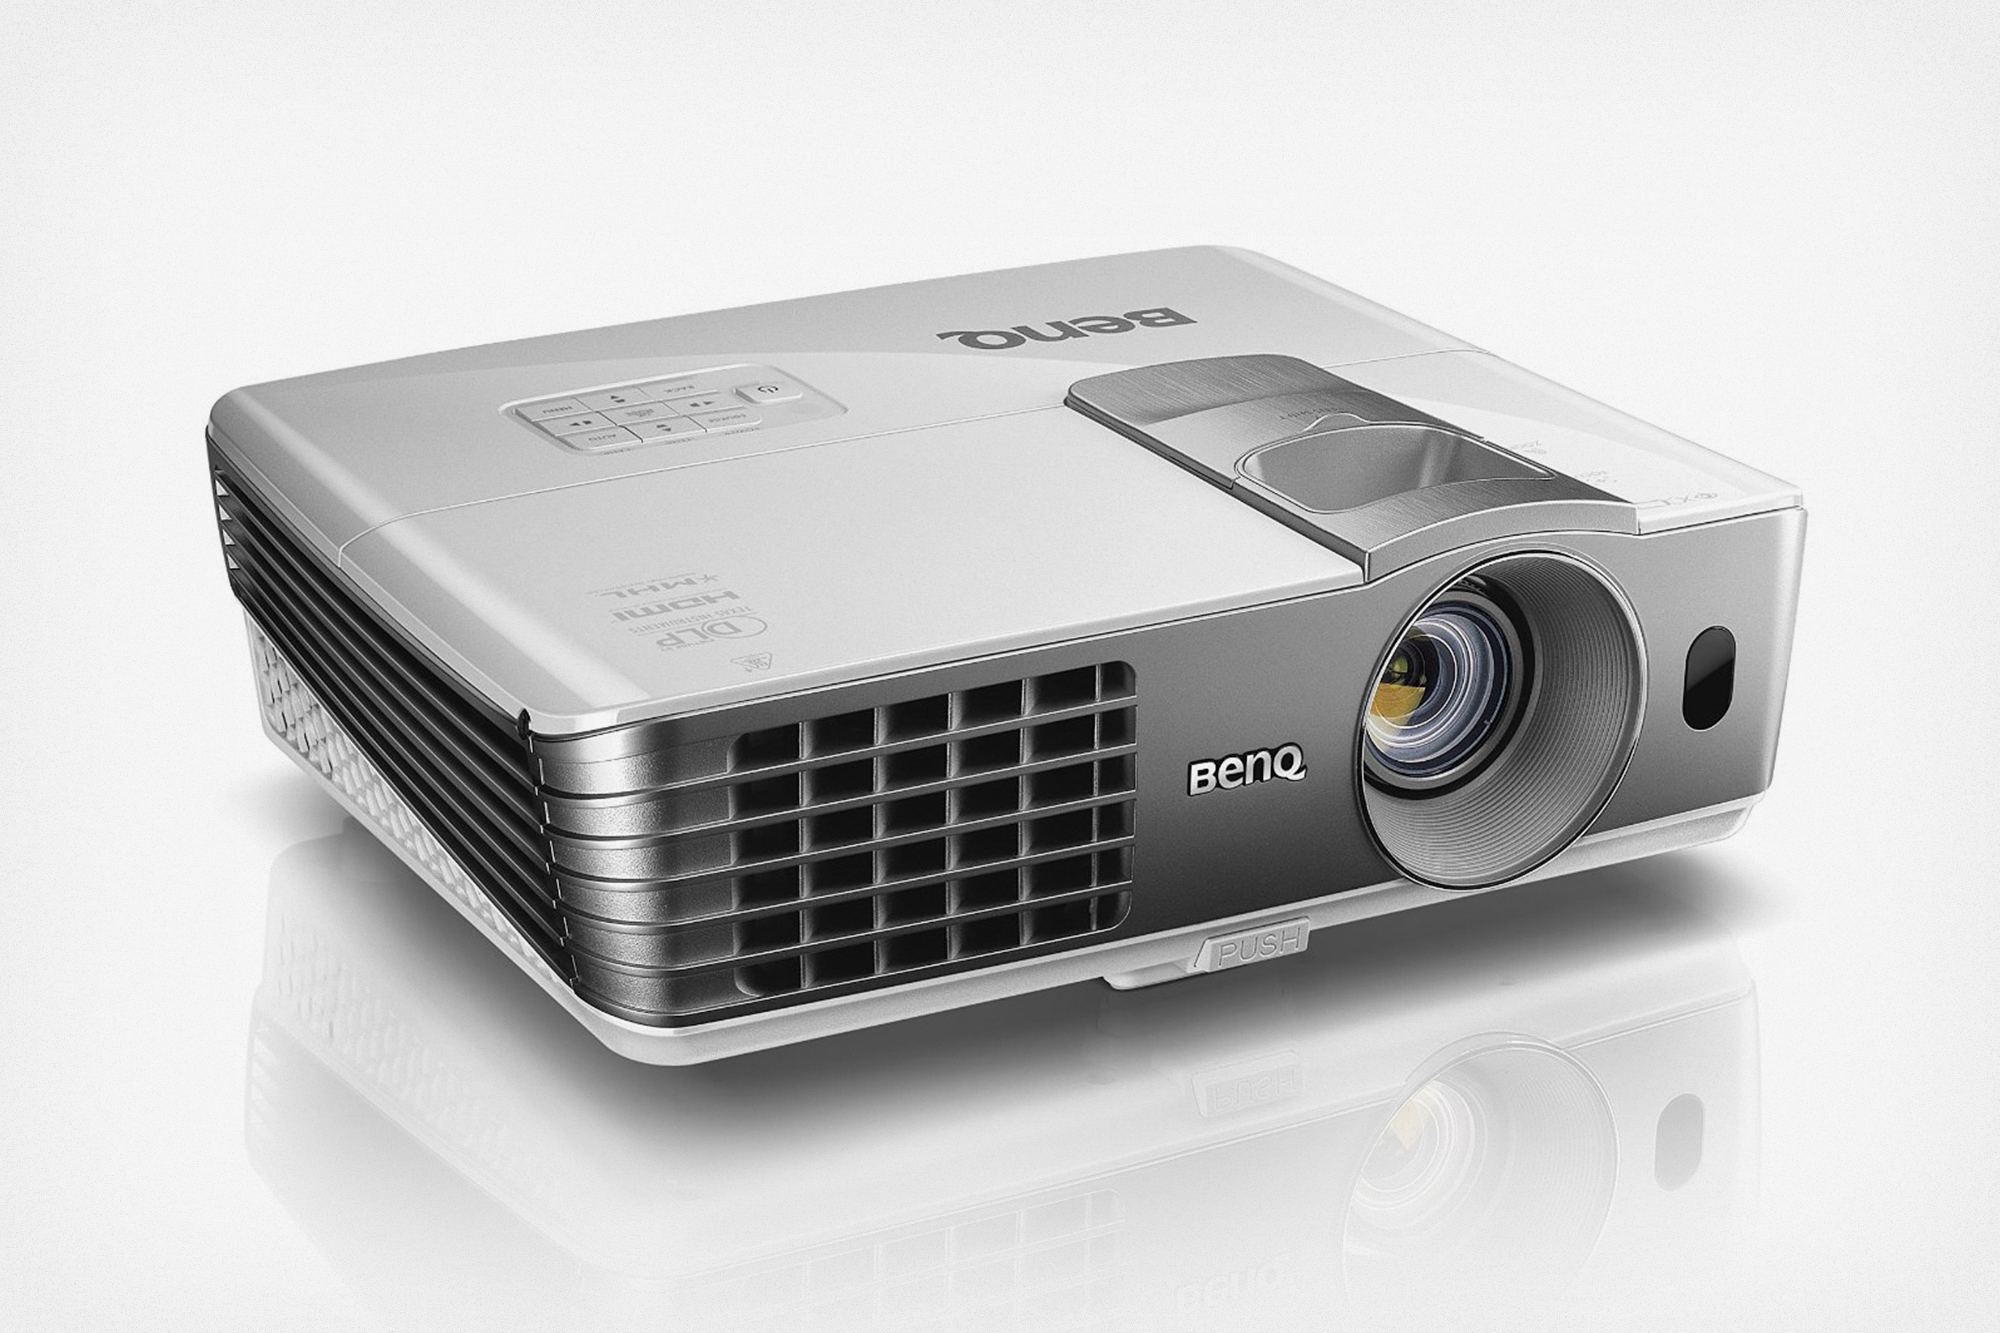 The best $1,000 projector